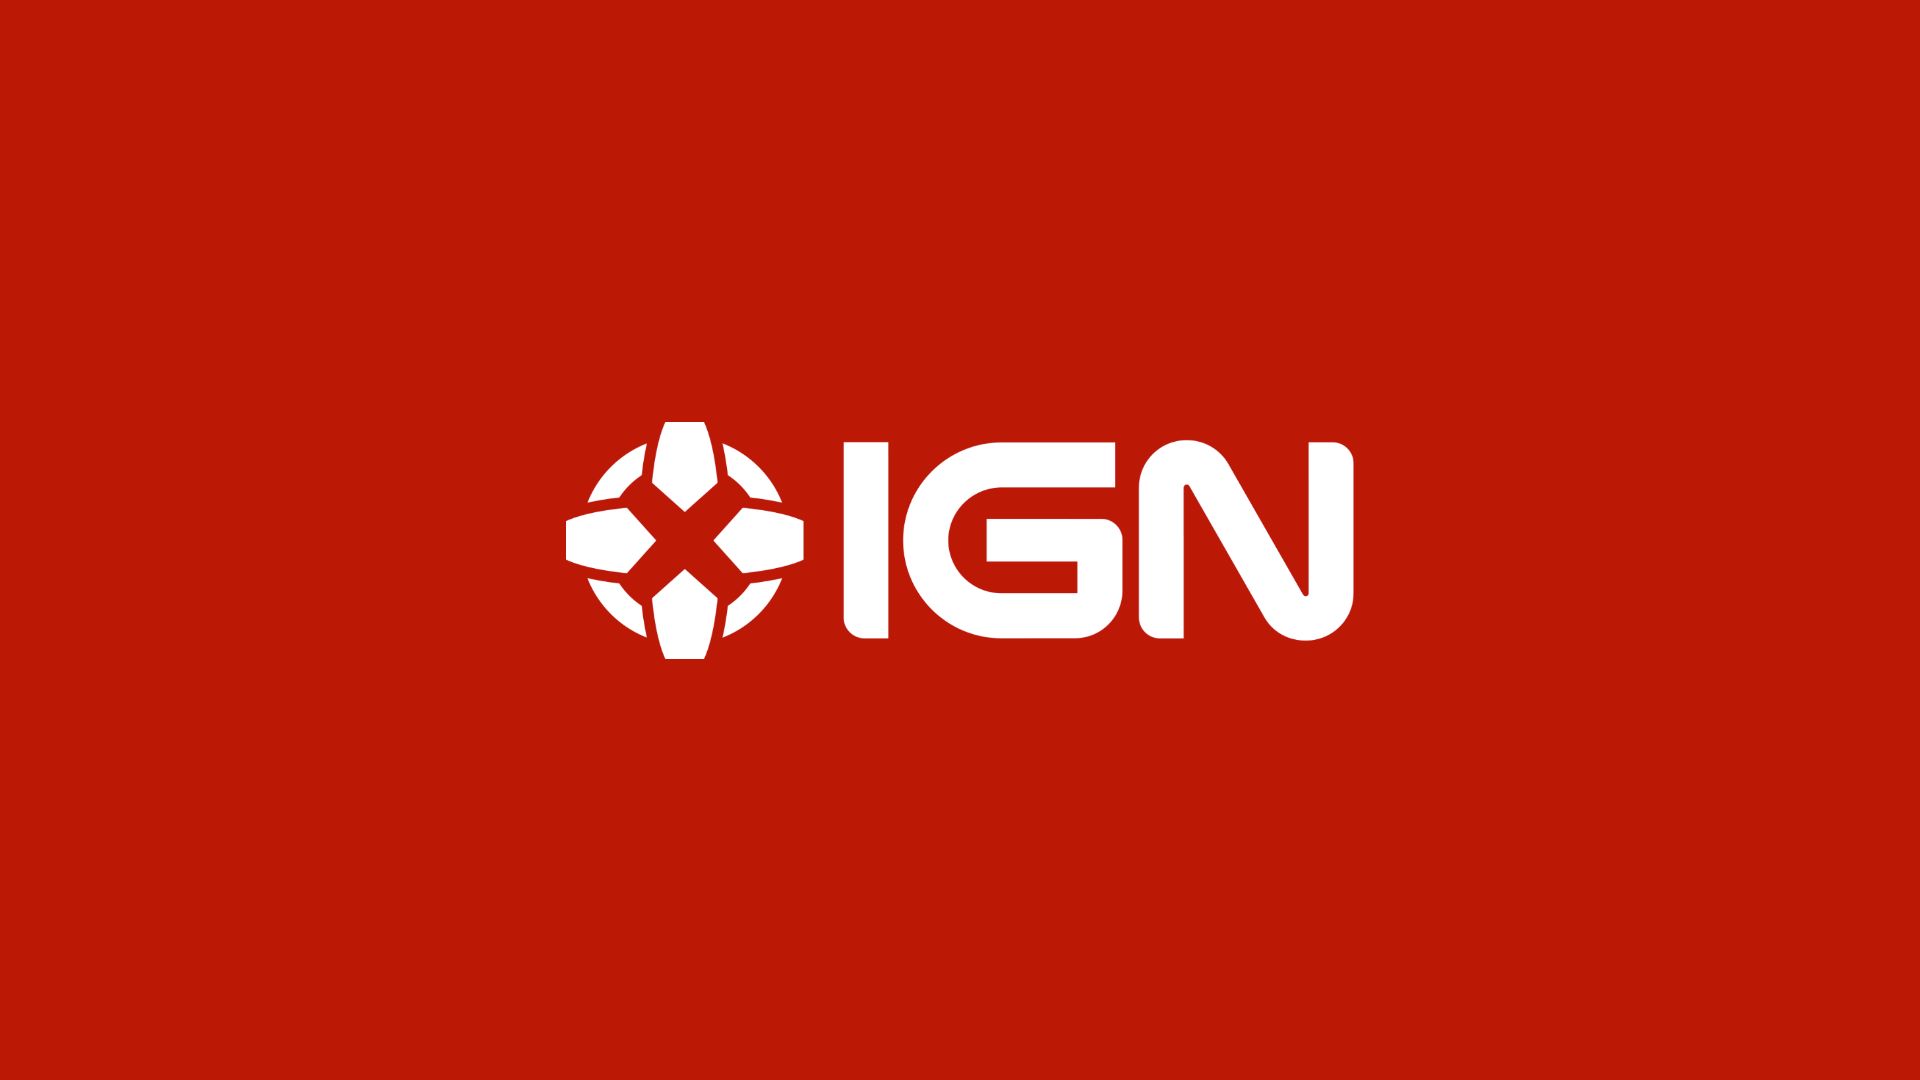 IGN’s base rates for news aggregation are insulting